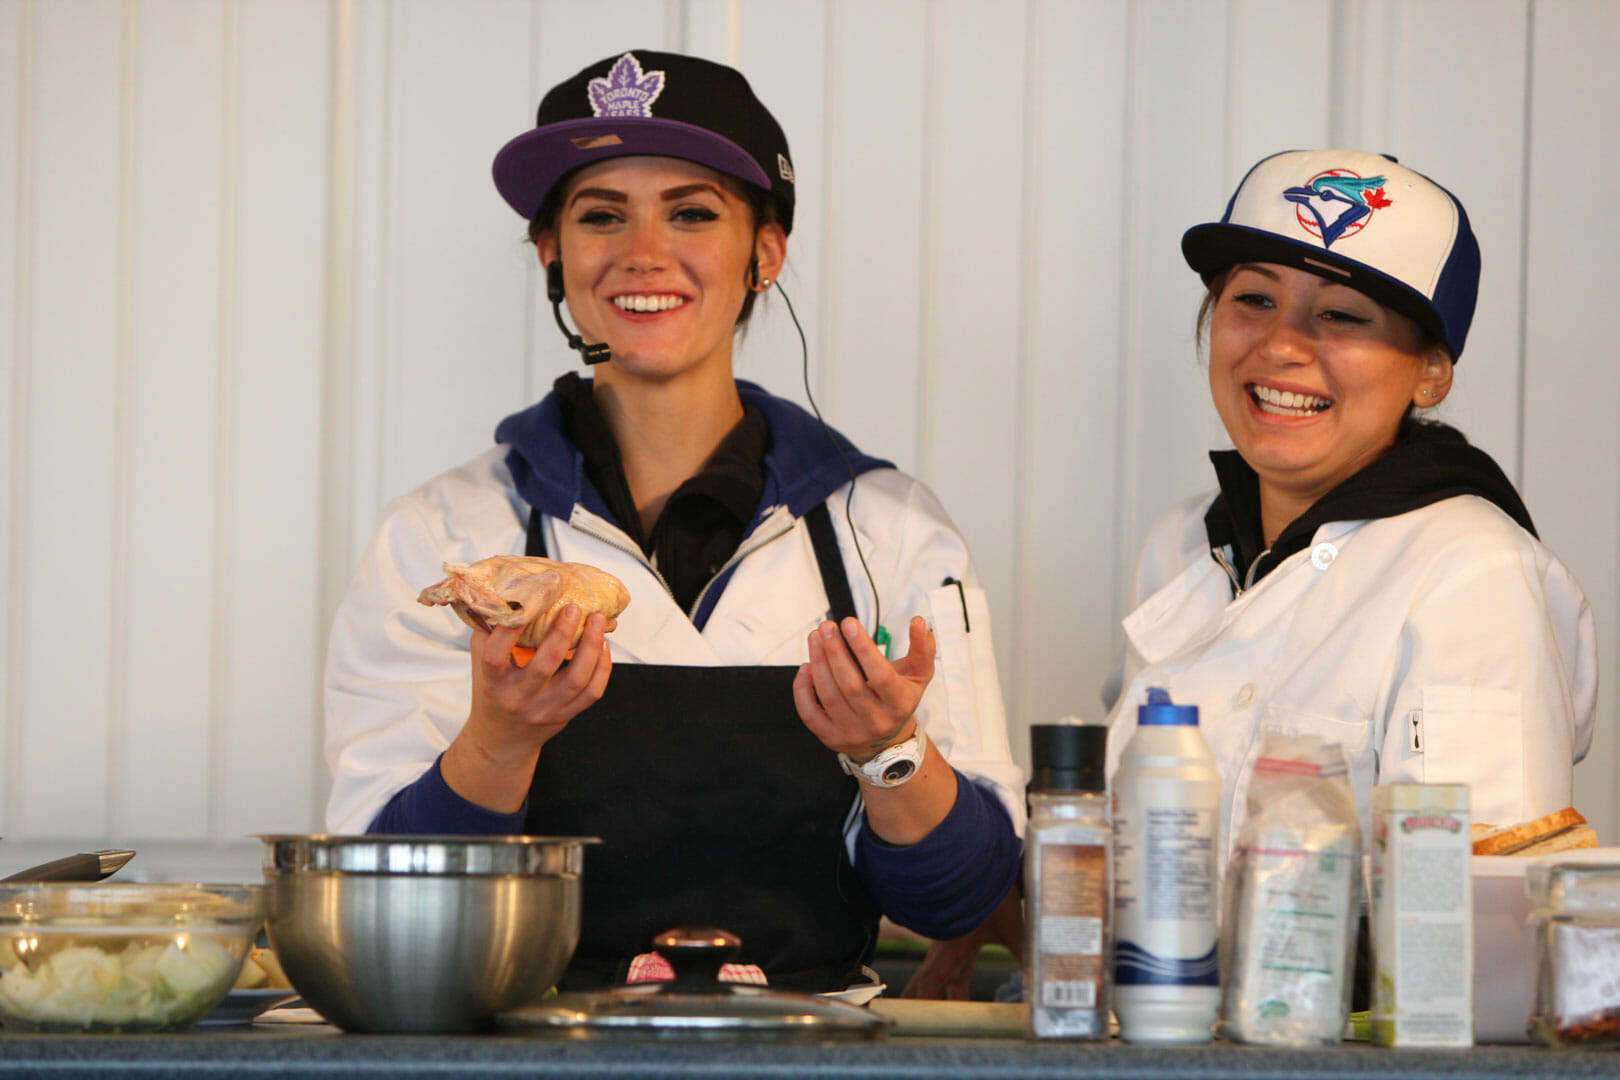 Cooking demonstrations by Sonia and Shannon